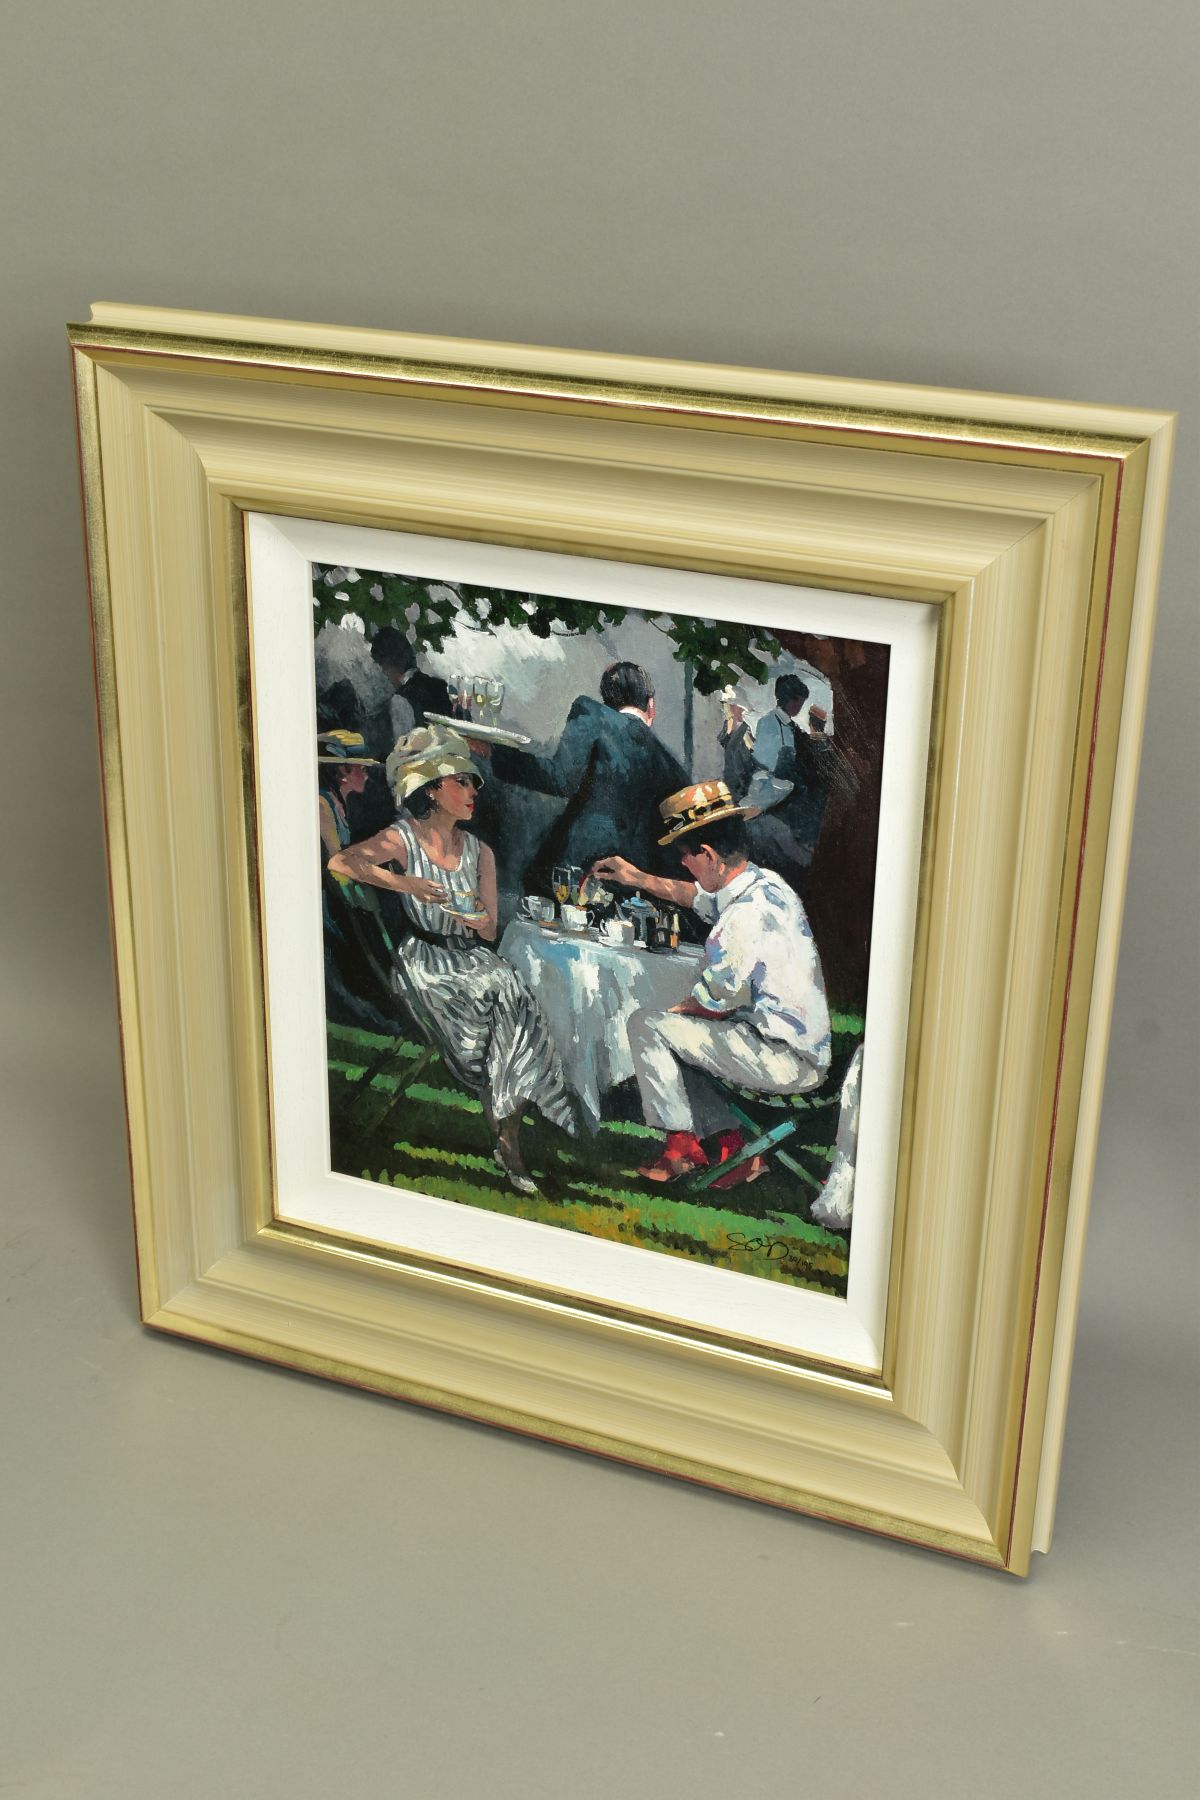 SHERREE VALENTINE DAINES (BRITISH 1959) 'AFTERNOON TEA', a signed limited edition print of figures - Image 5 of 8